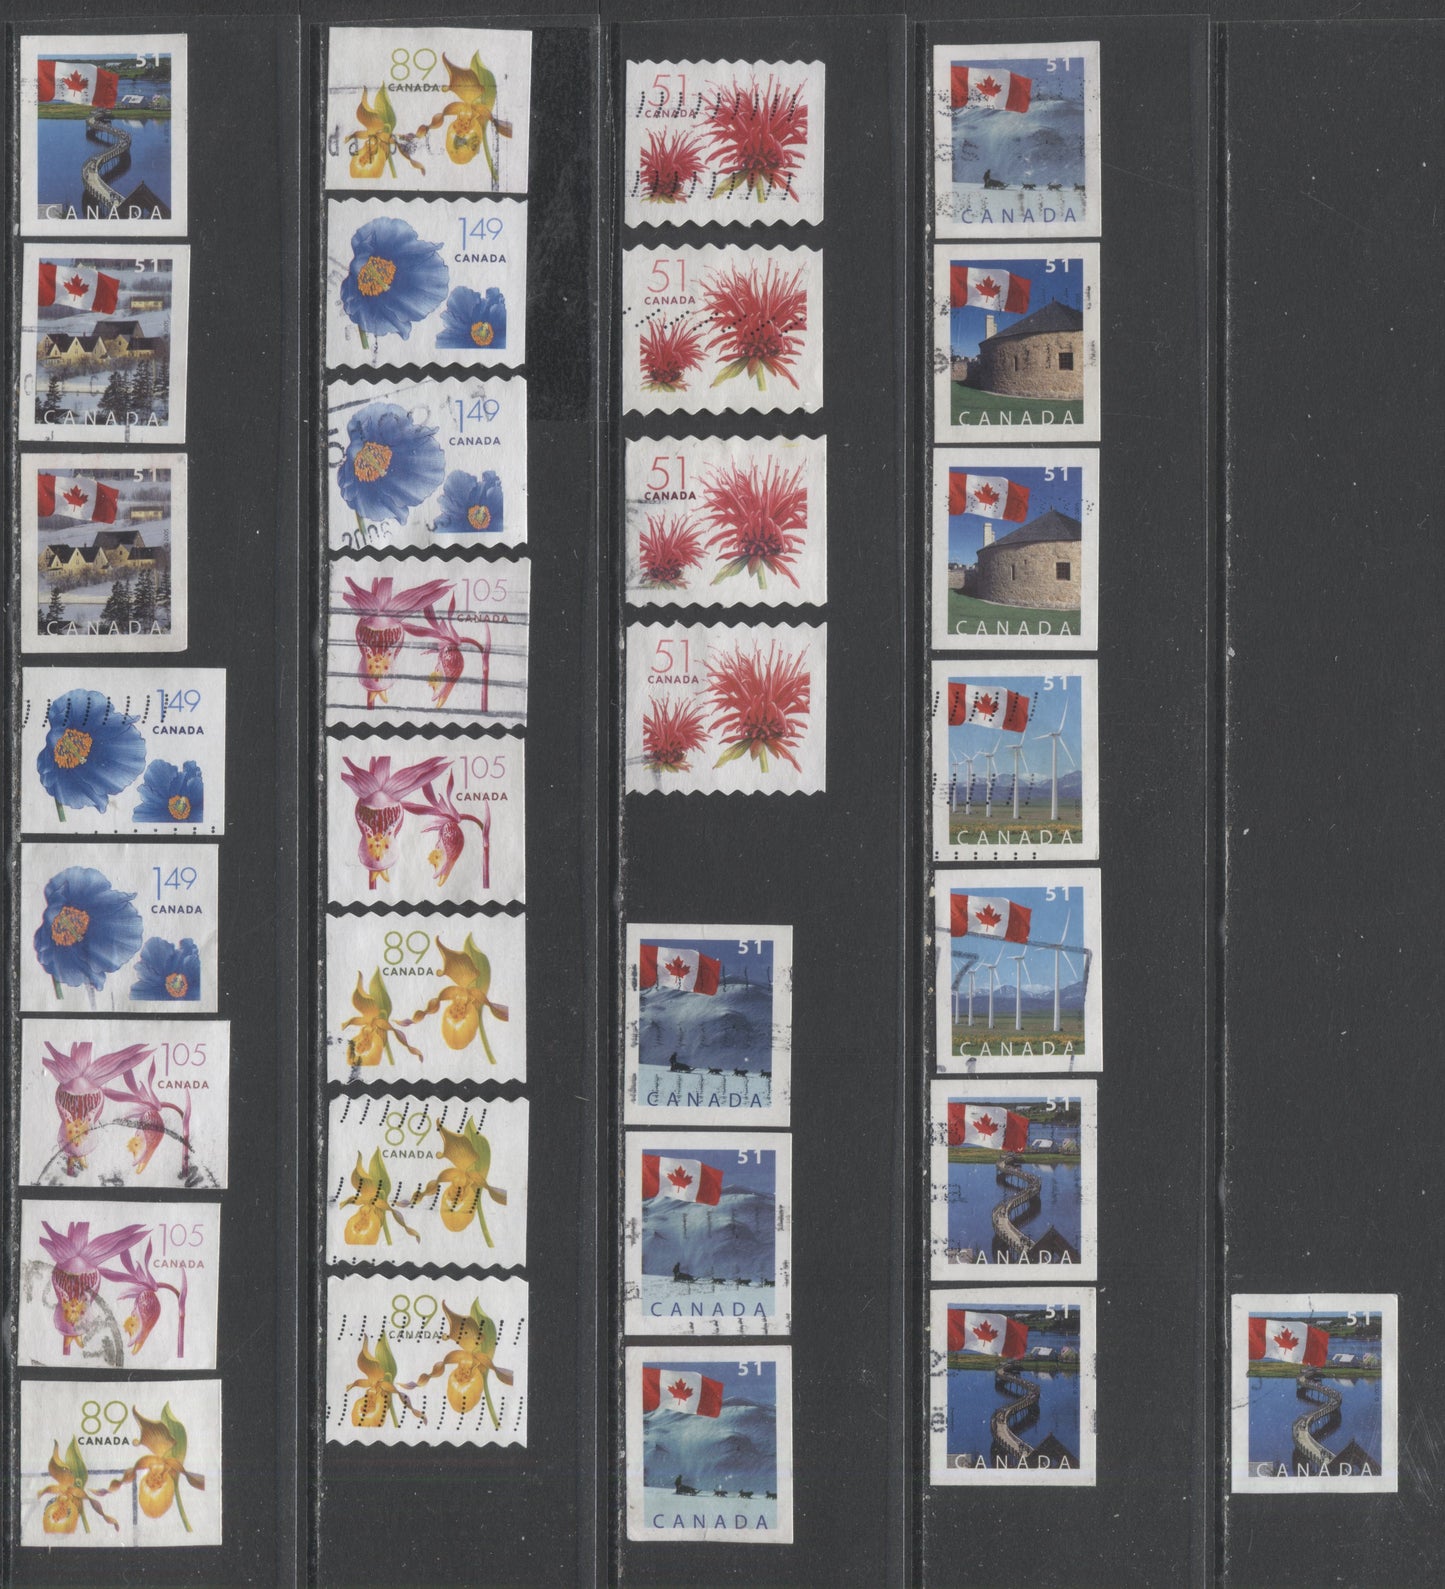 Lot 35 Canada #2128/2139i 51c-$1.49 Multicolored Red Bergamot, Flag Over Dogsled, 2005 Flower Definitives (2) - Coils, Flag Booklet, 31 Very Fine Used Singles On Different Papers And Tags $15.10